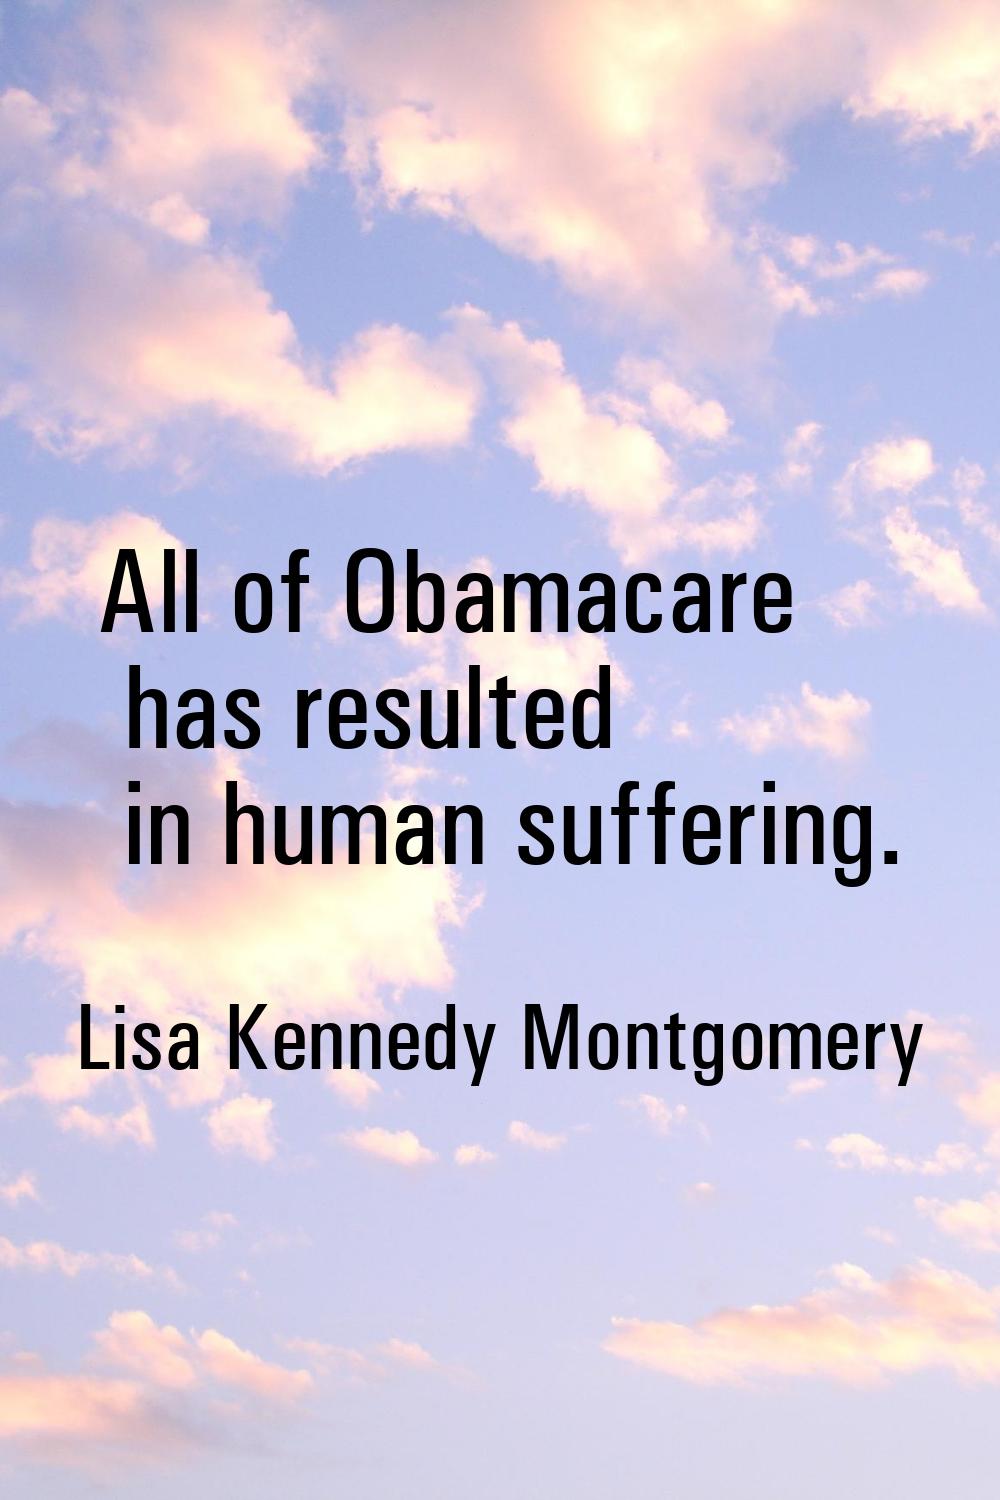 All of Obamacare has resulted in human suffering.